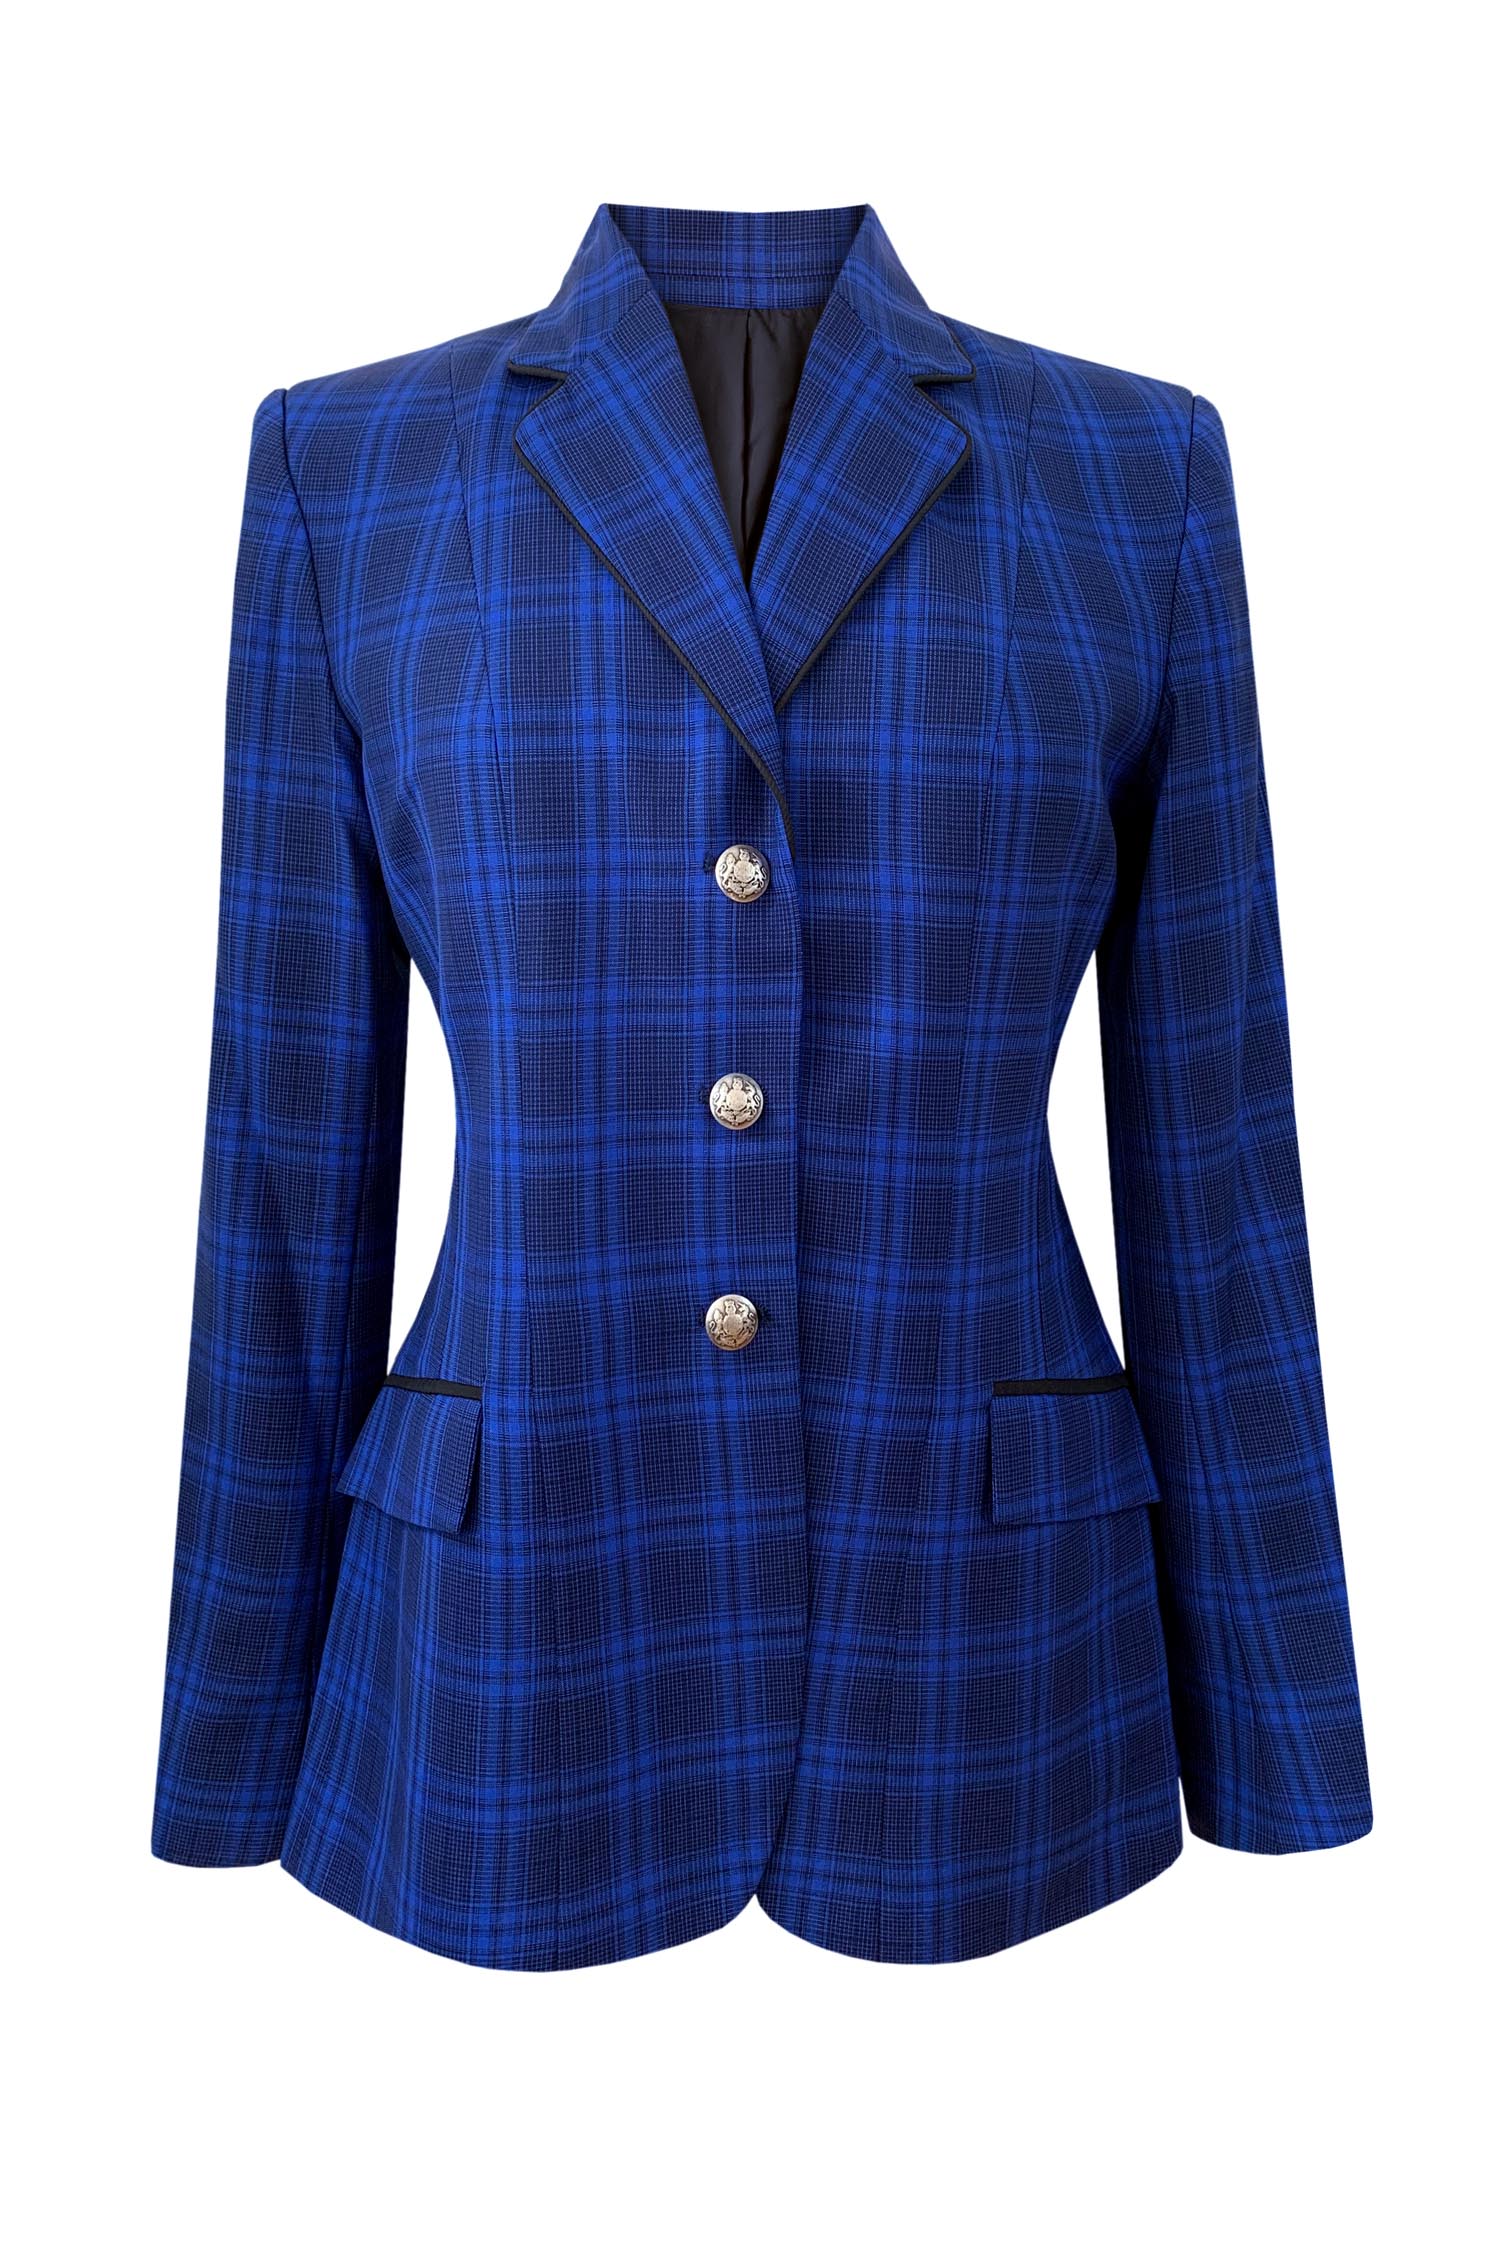 Blue Azure and Black Plaid - Black Piped